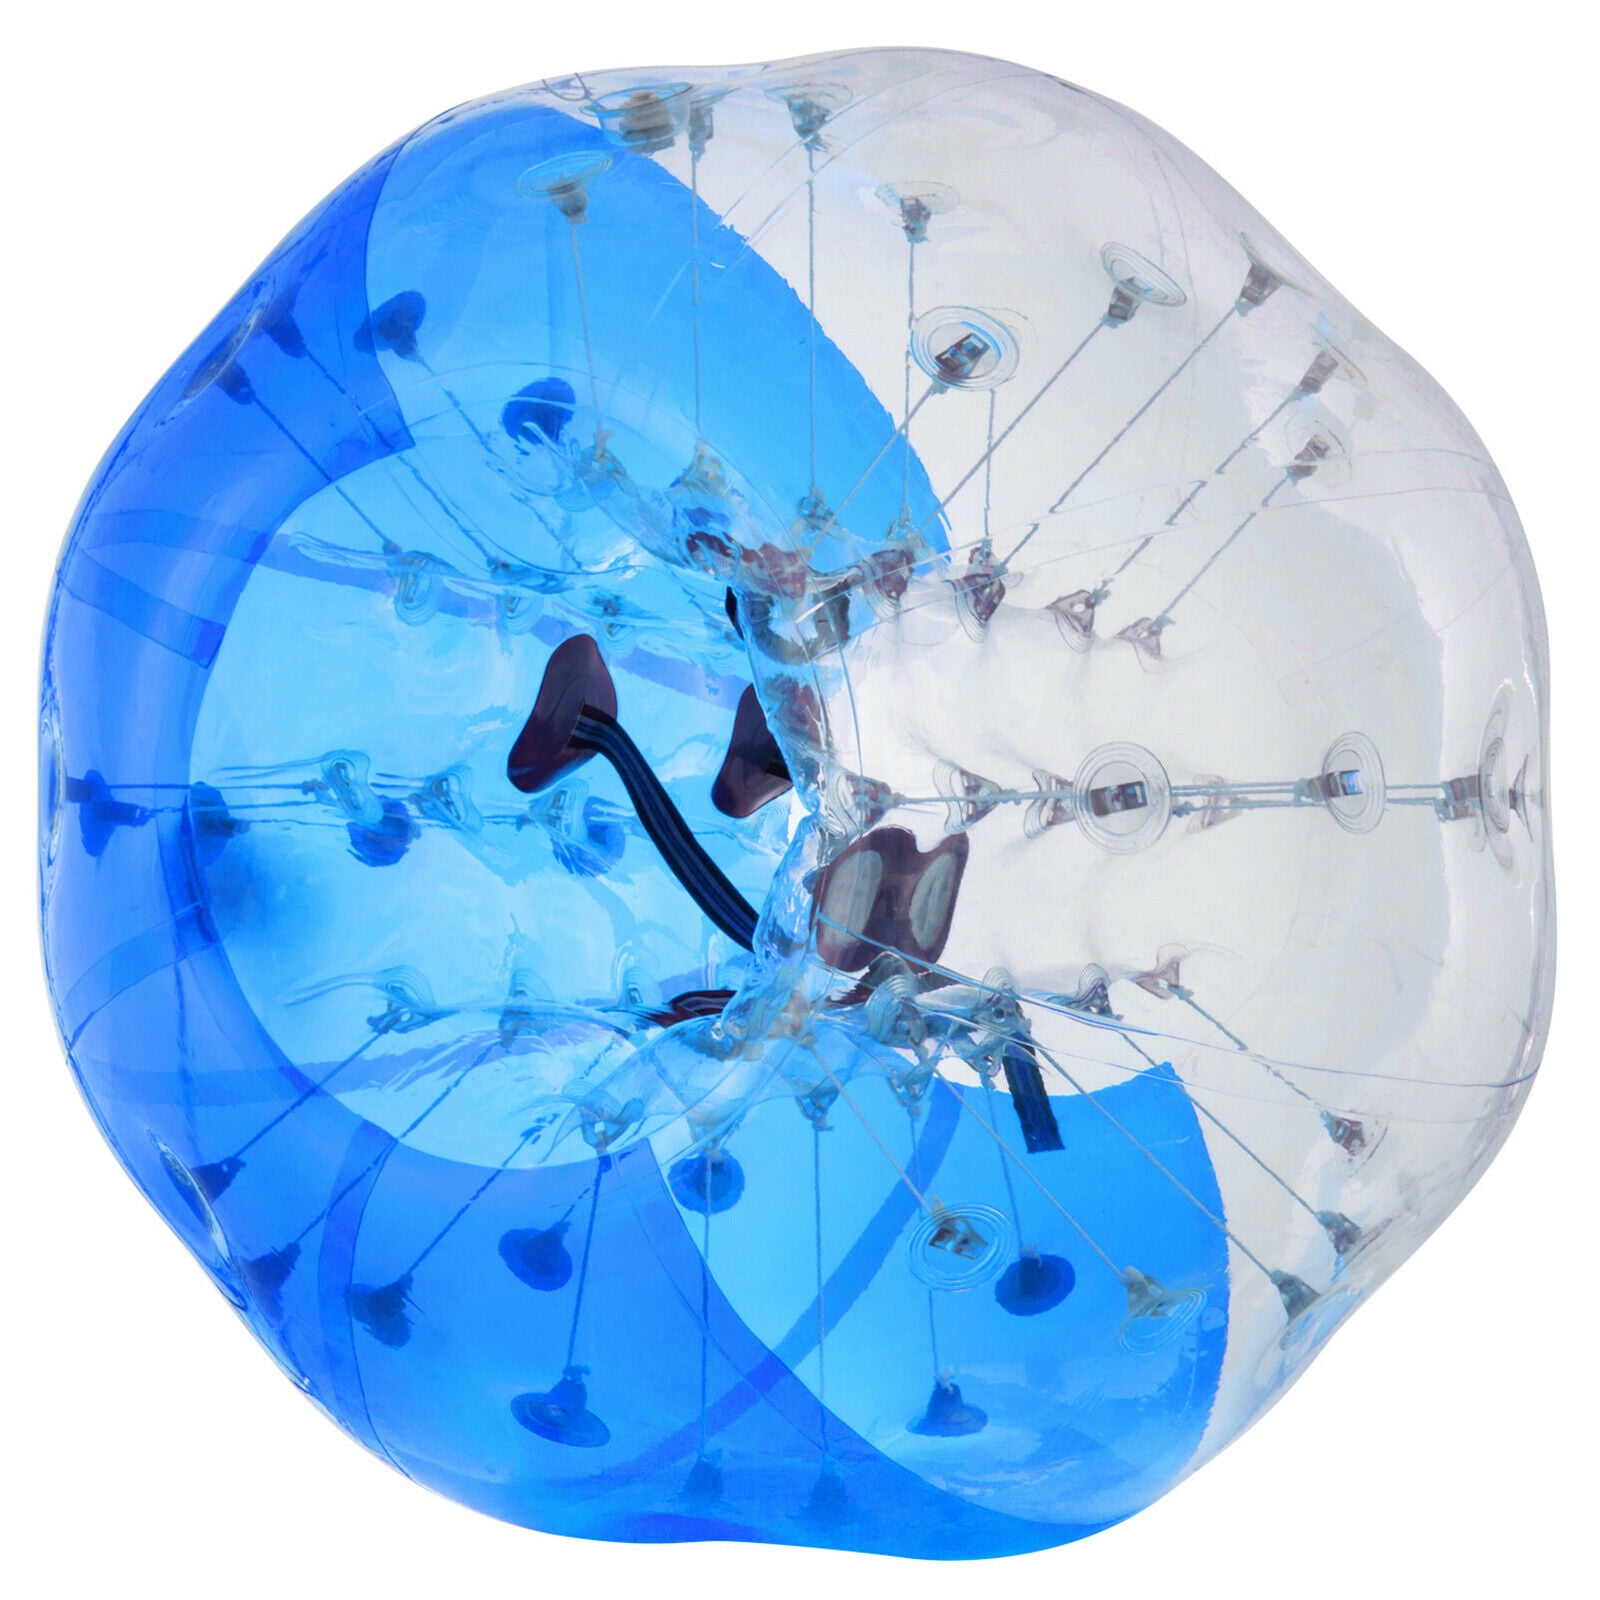 Free Shipping 1200w Air Blower Pump For Zorbing Ball,bumper Ball,bubble  Football,water Roller Ball,bubble Soccer Ball Sports - Inflatable Toys -  AliExpress